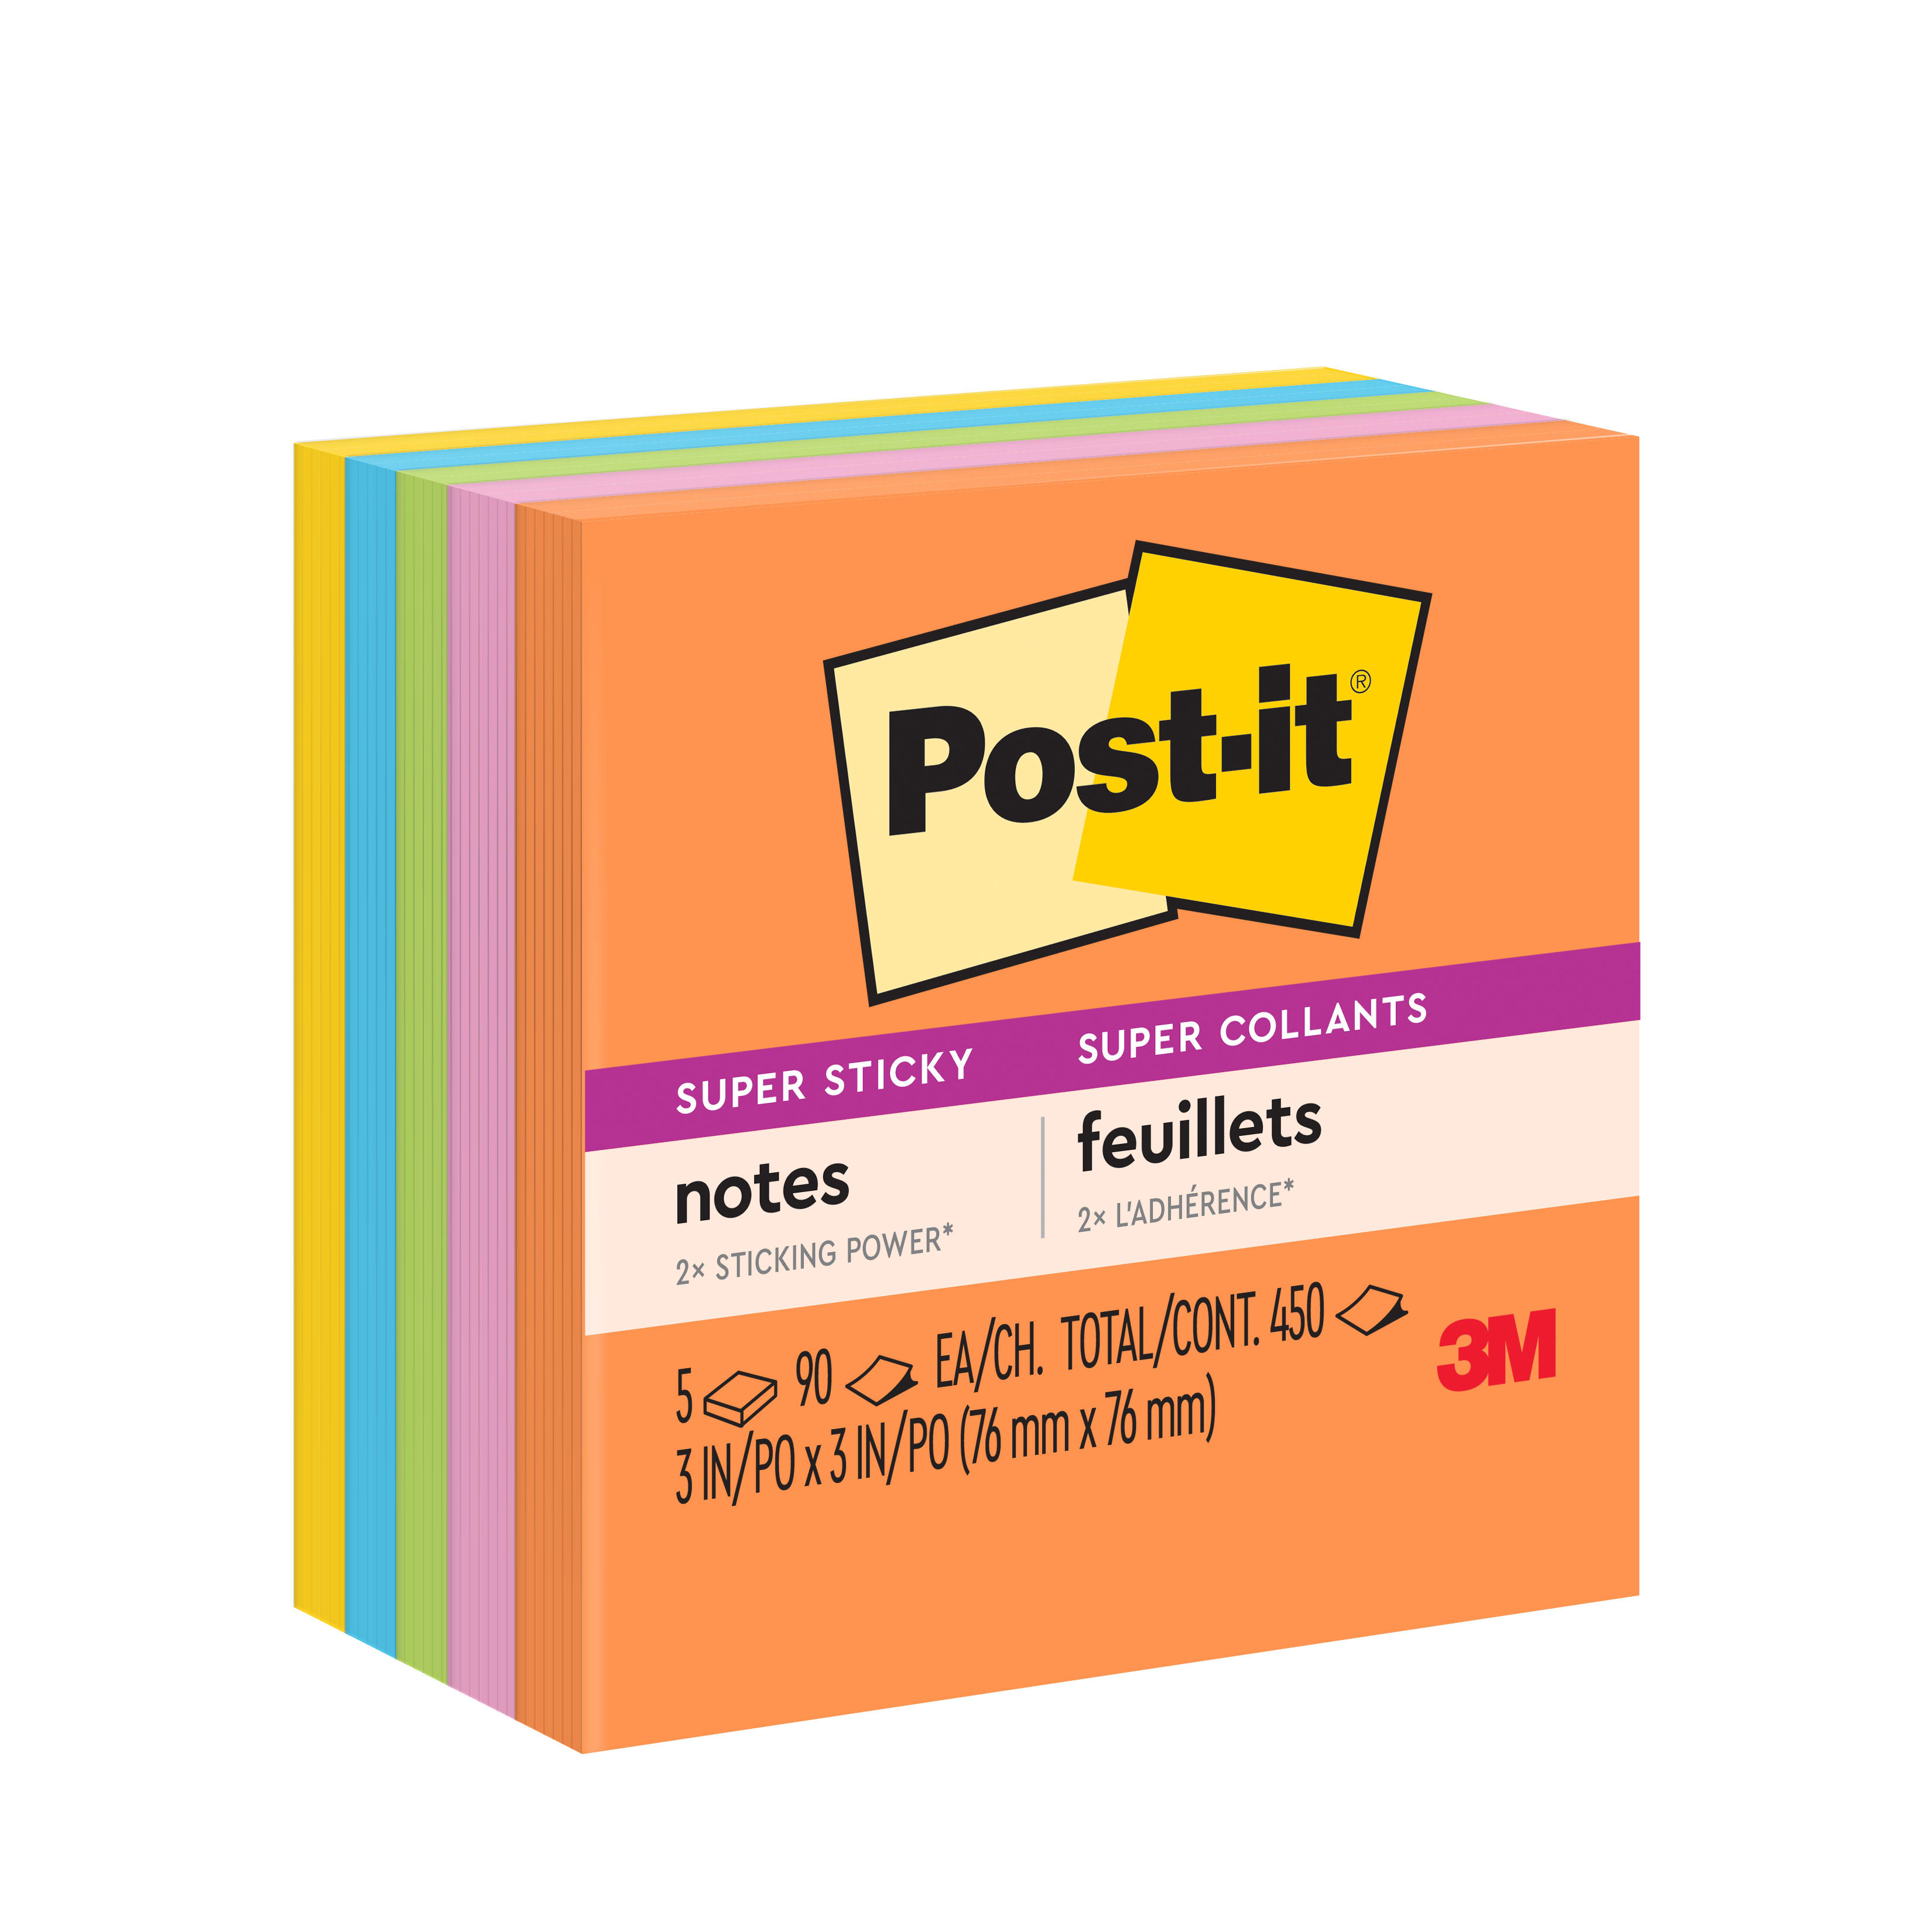 PANTONE® USA  The Art of Ideation and Color Collide in the New Post-it  Note Collections Collab with Pantone Color Institute.